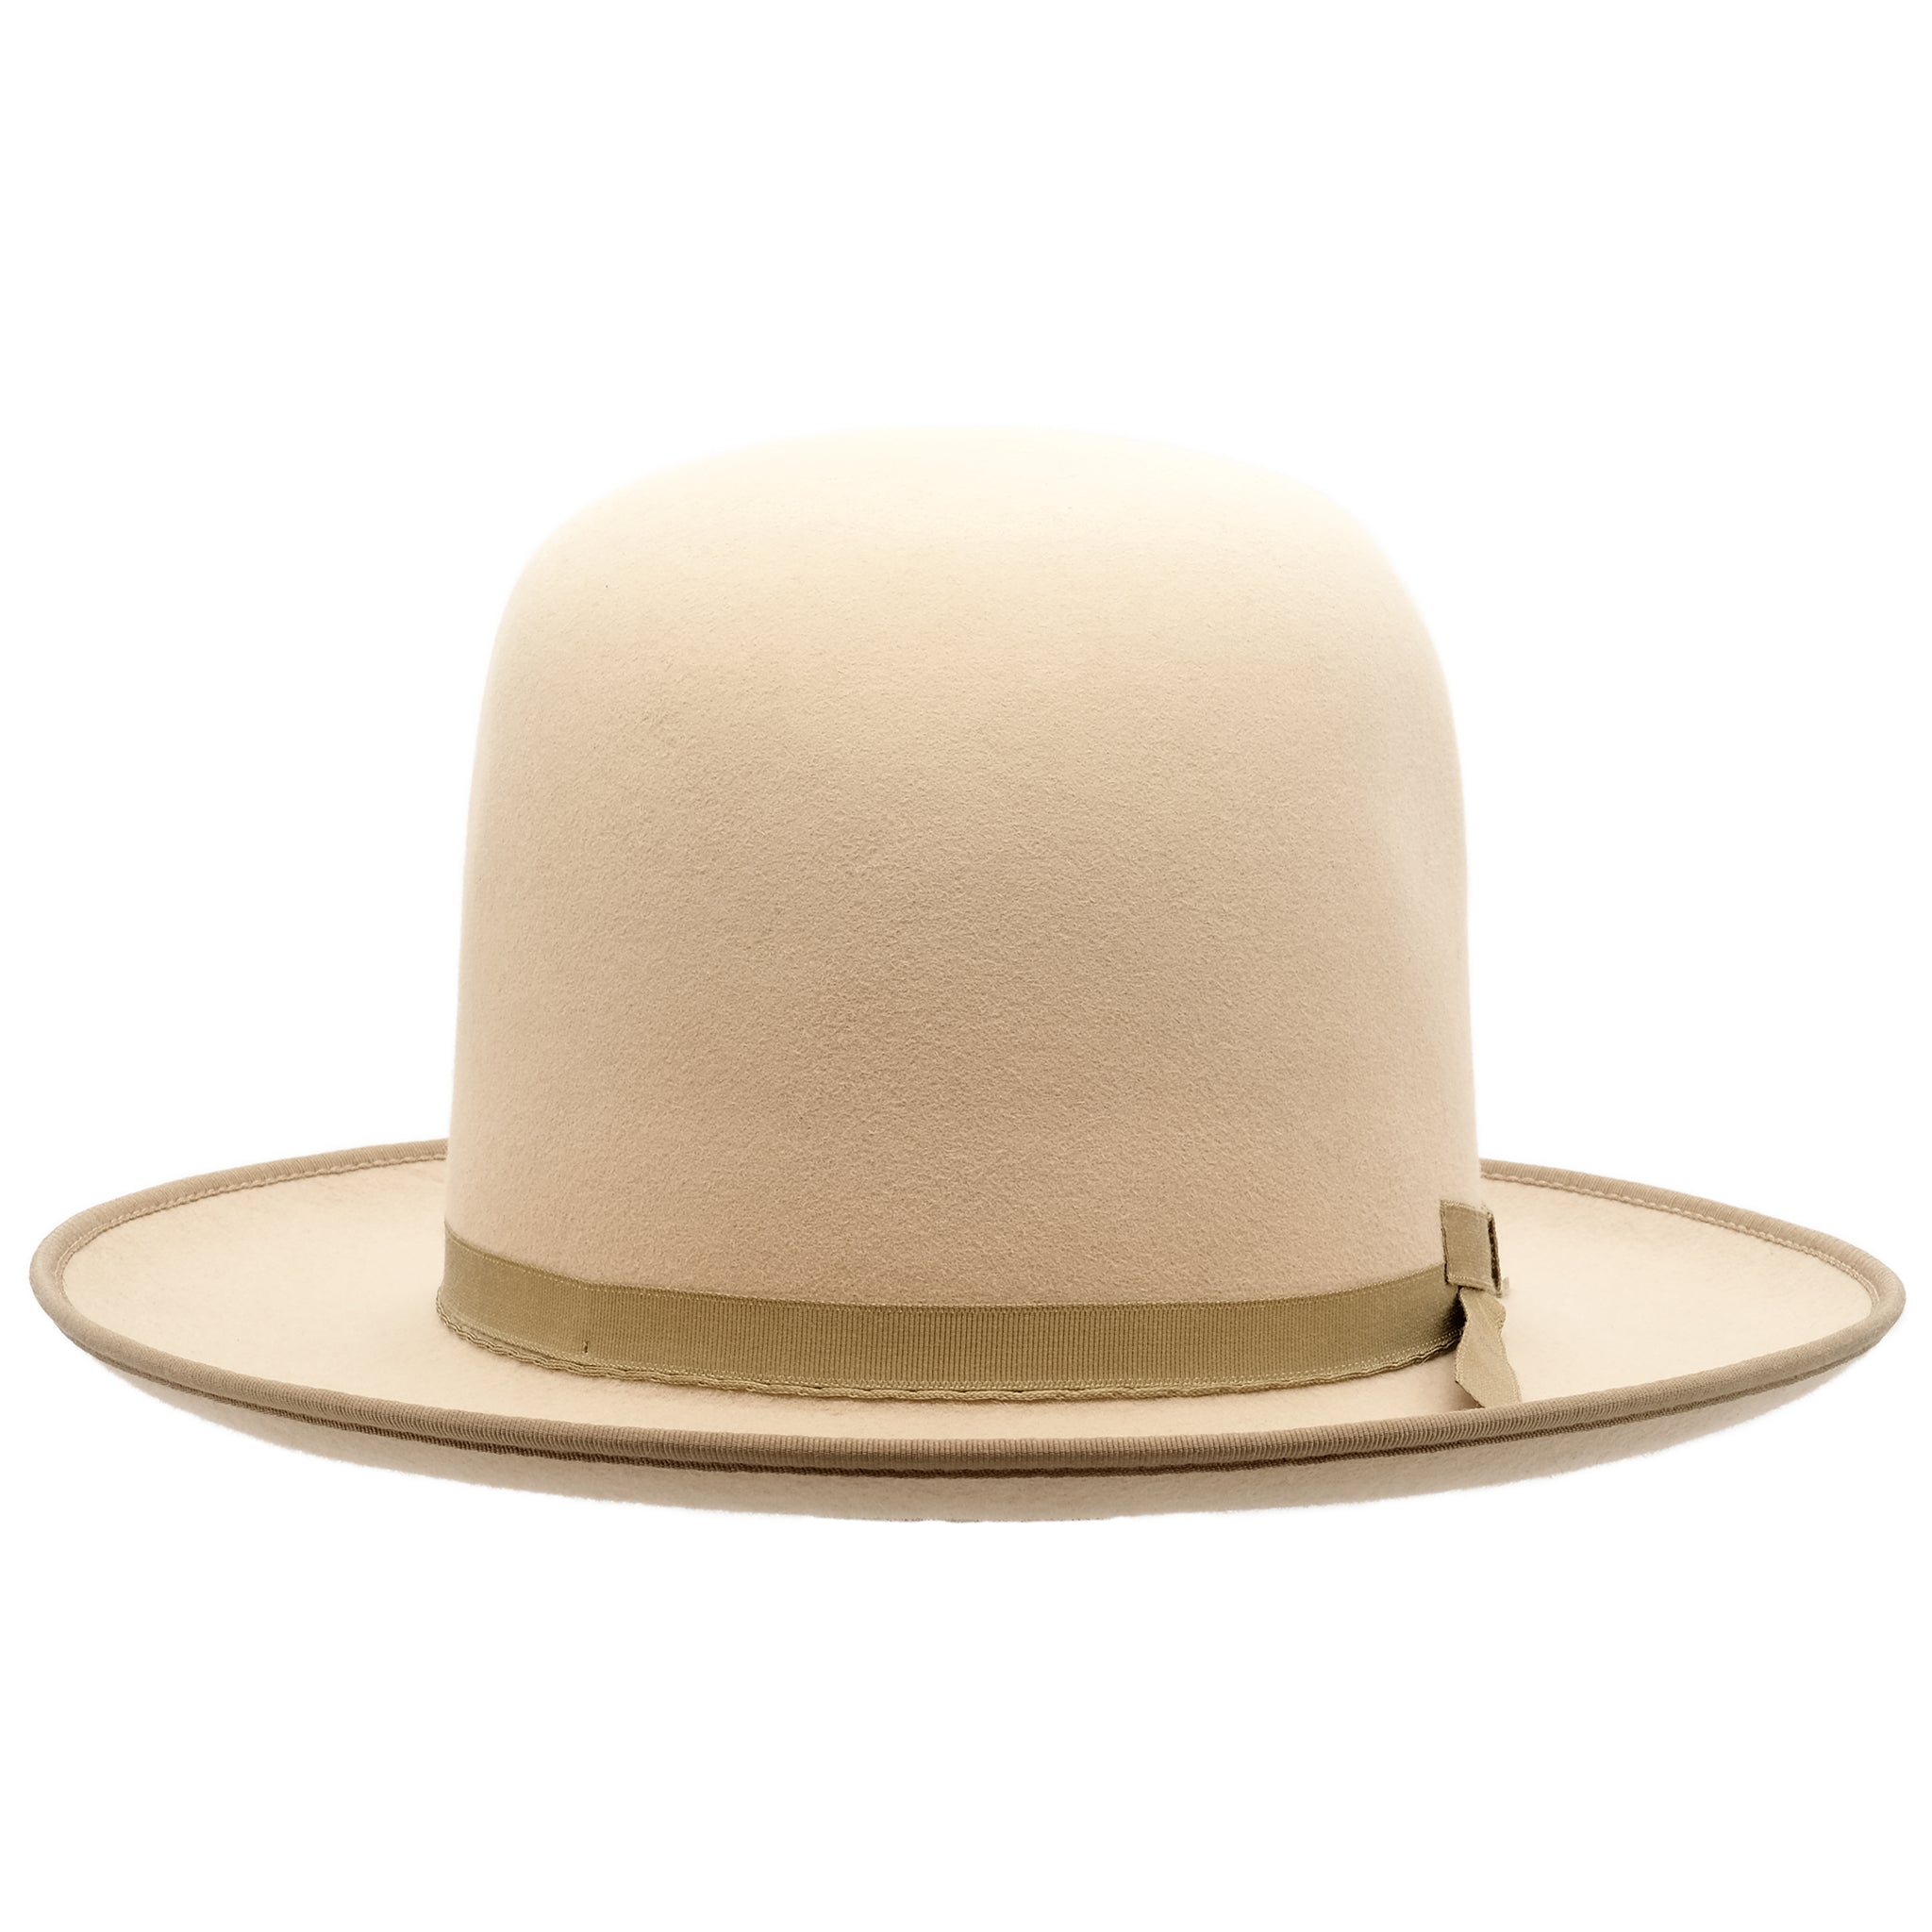 Front view of Akubra Campdraft in Silver Belly Sand colour, shown with an open crown